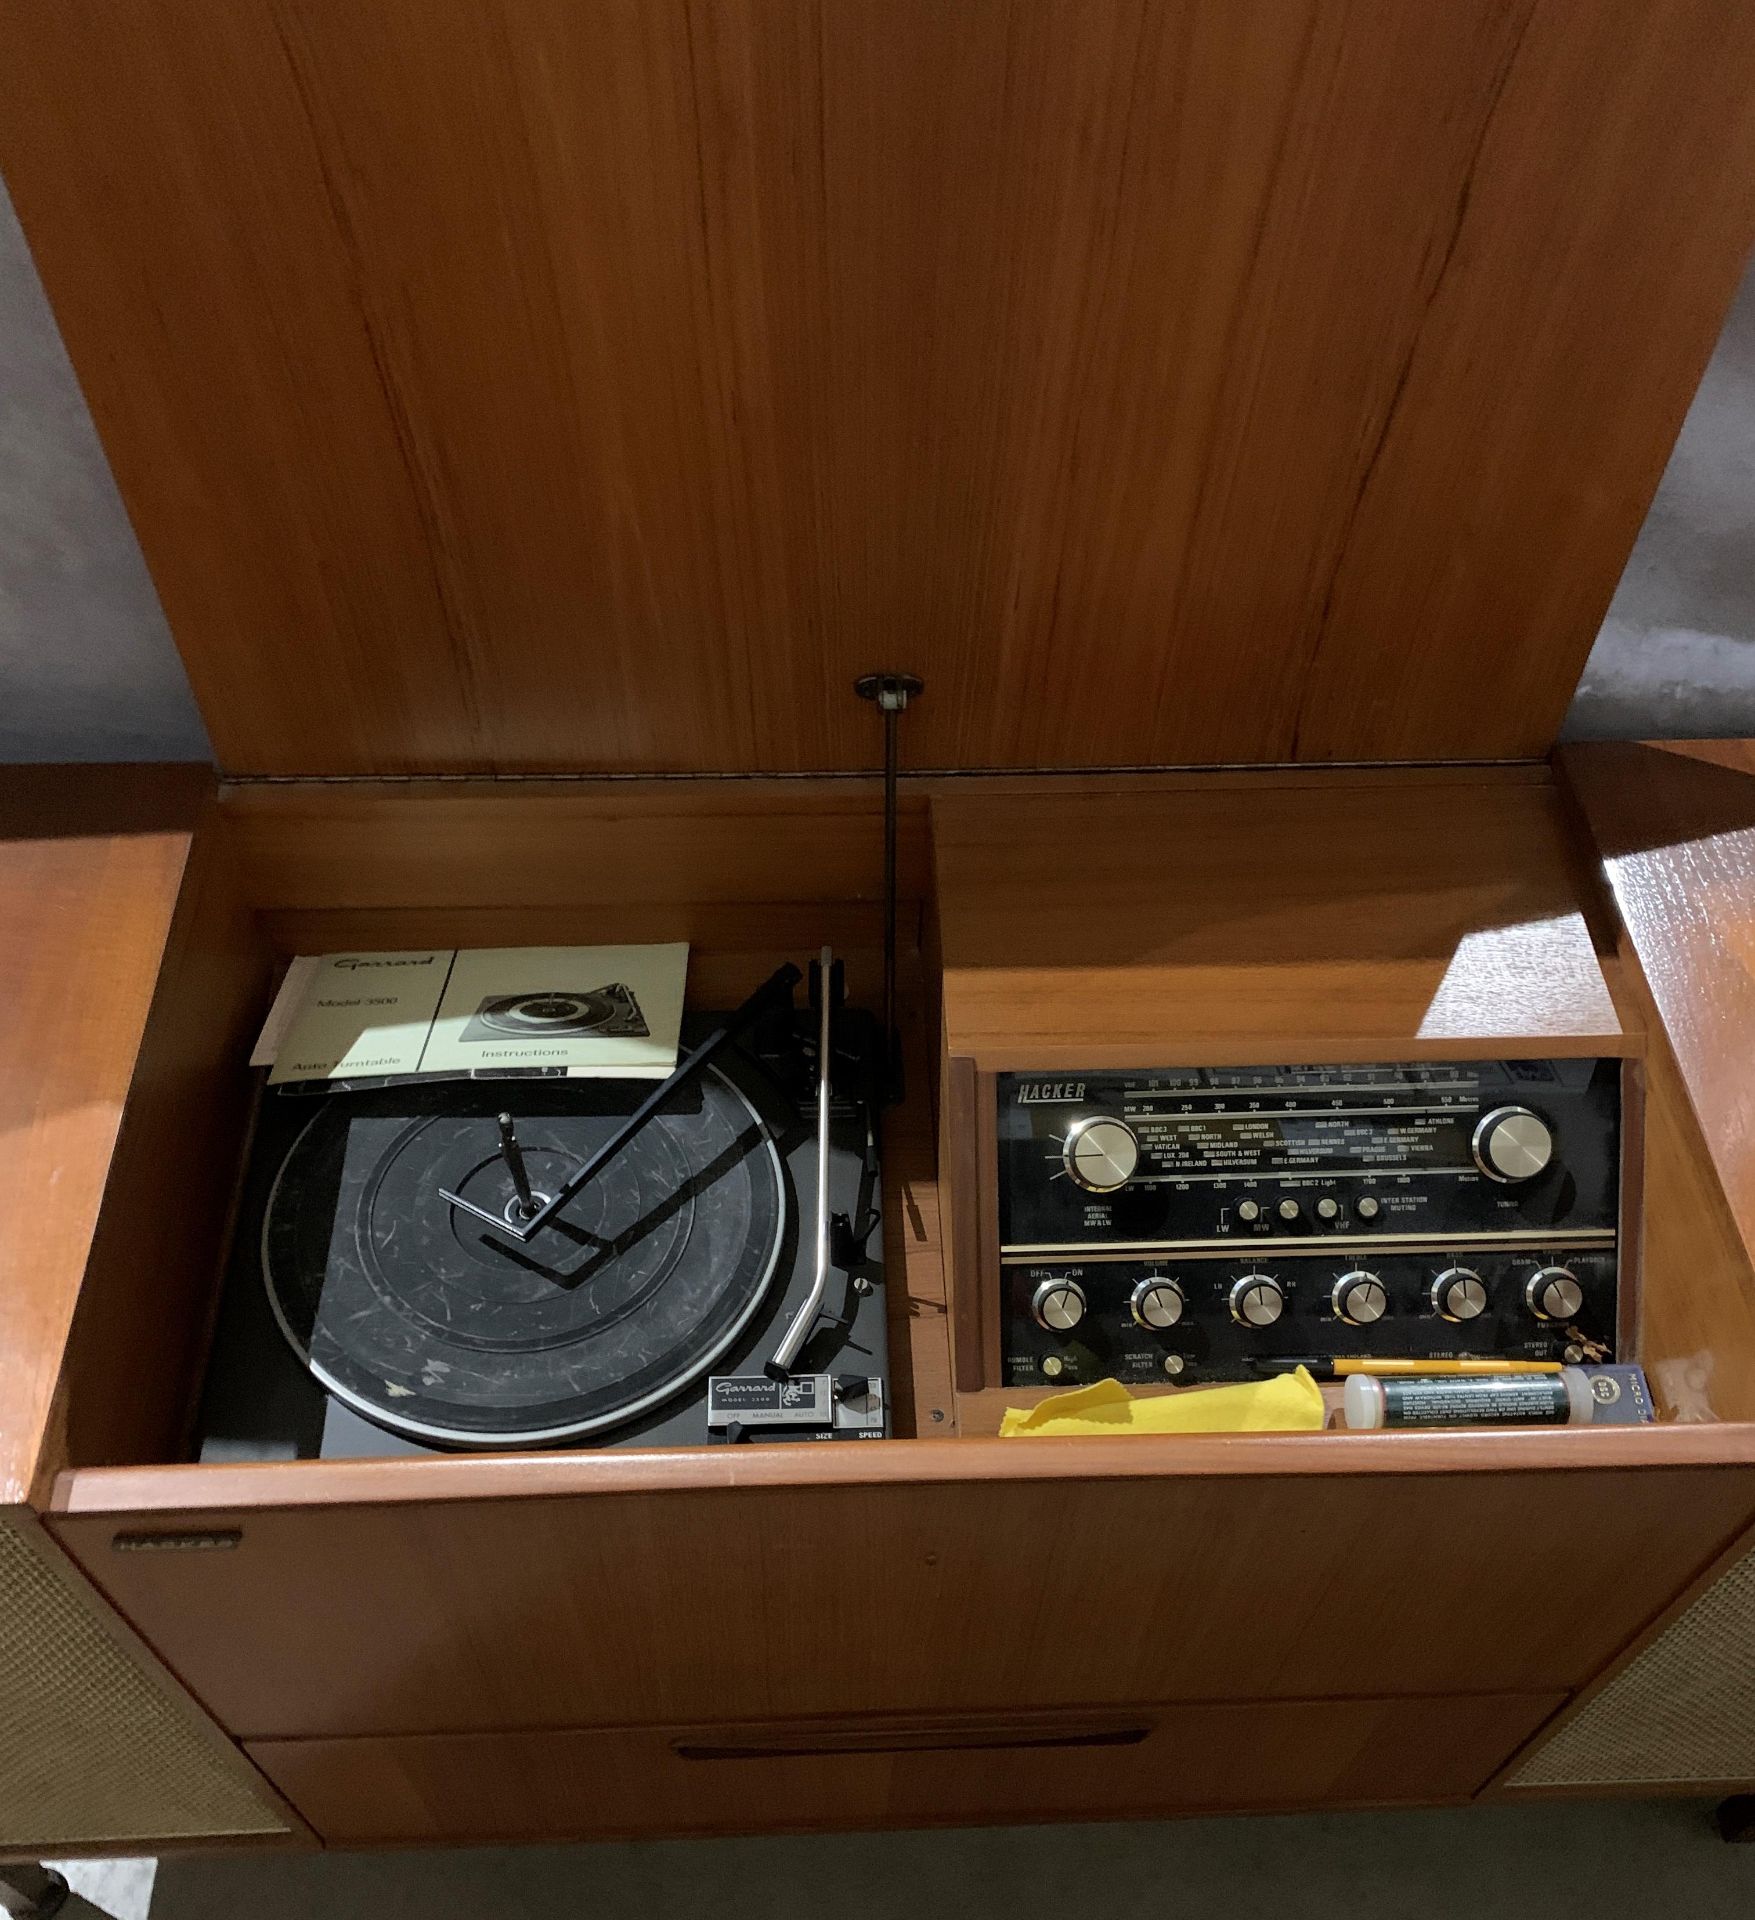 A Hacker radiogram, model number CU1200B in teak case with Garrard model 3500 automatic turntable, - Image 2 of 4